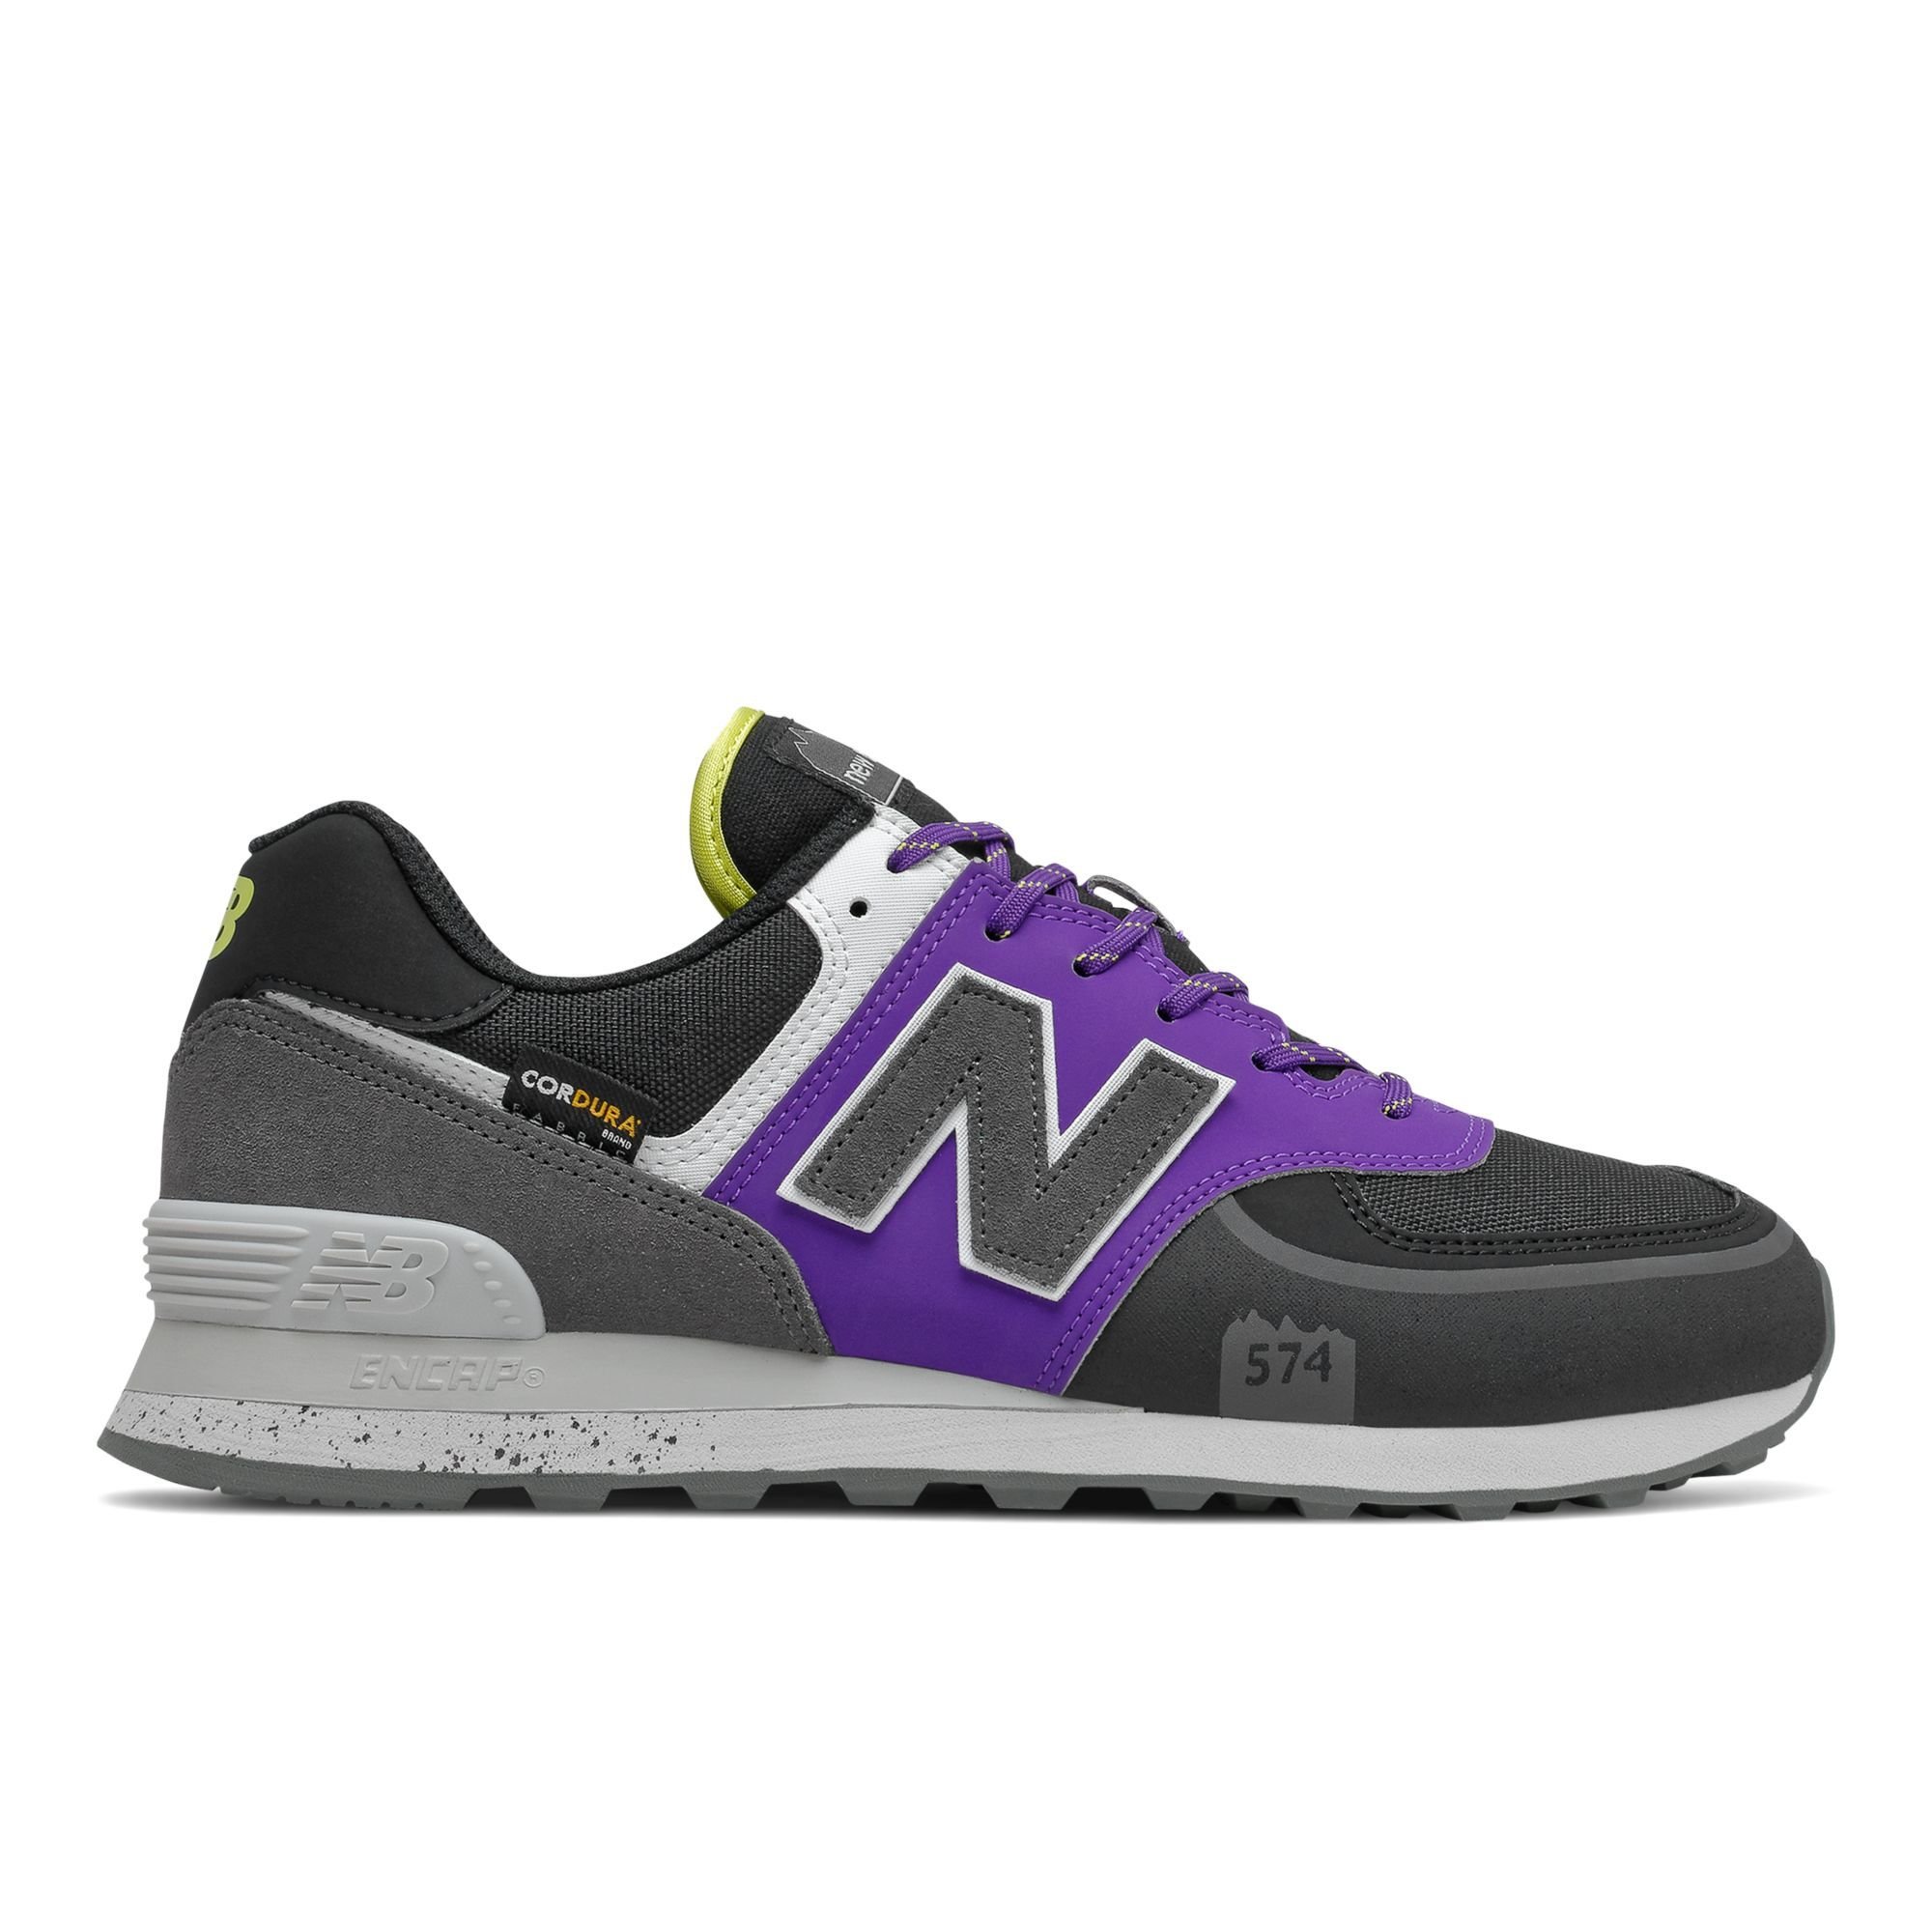 New balance cordura 574. New Balance 574 Cordura. New Balance 574 Purple. New Balance 574 Cordura Black. New Balance 574 Protection Pack.